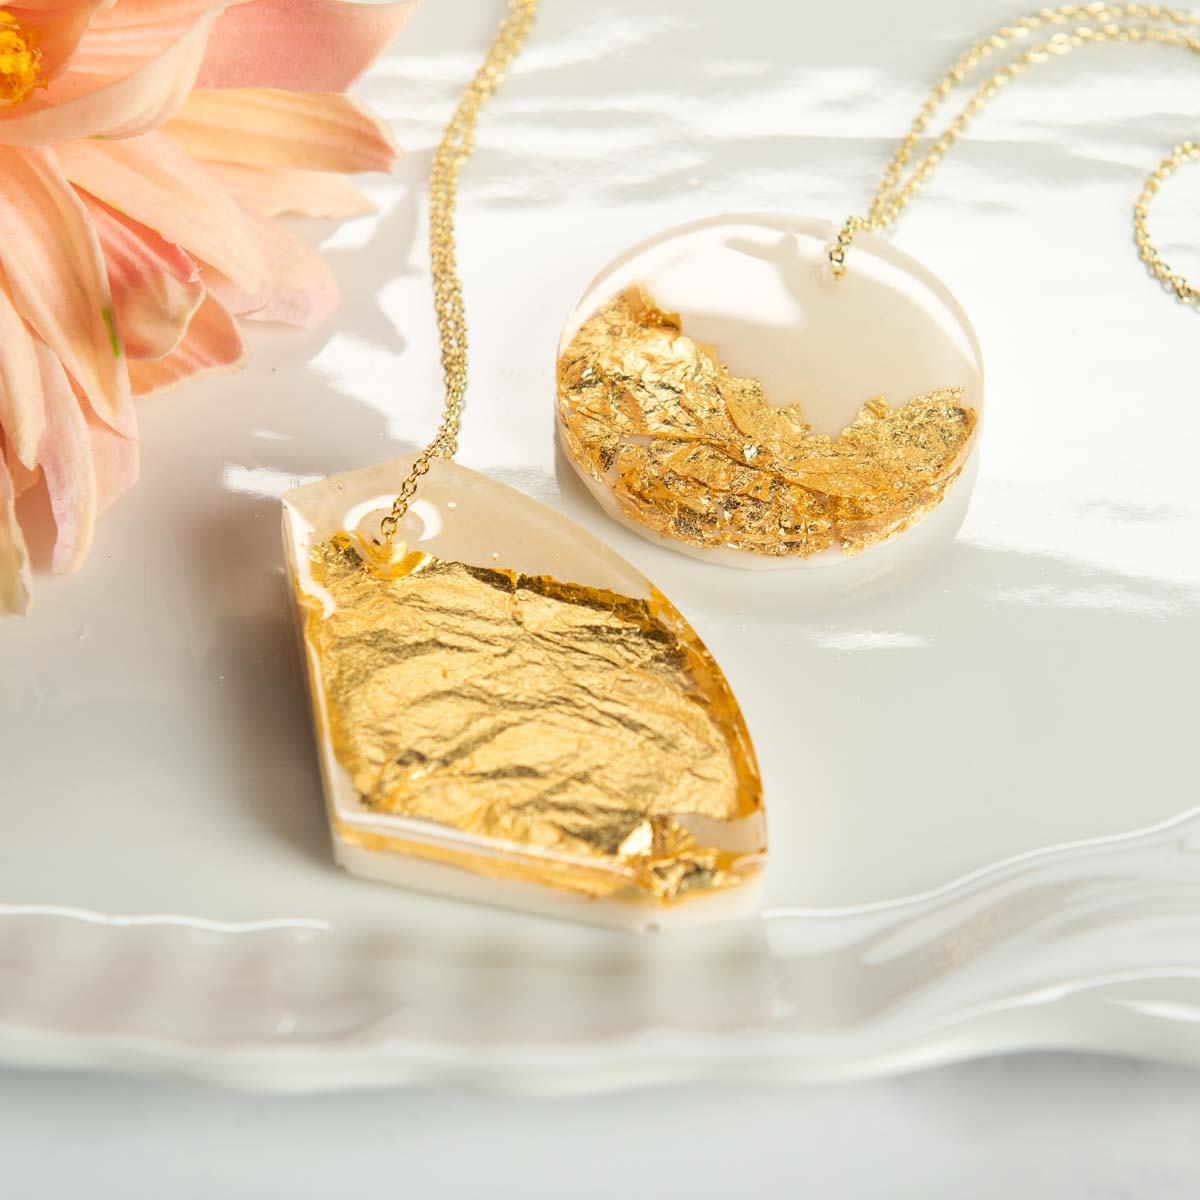 Gold Leaf Resin with These Easy Ideas - Mod Podge Rocks